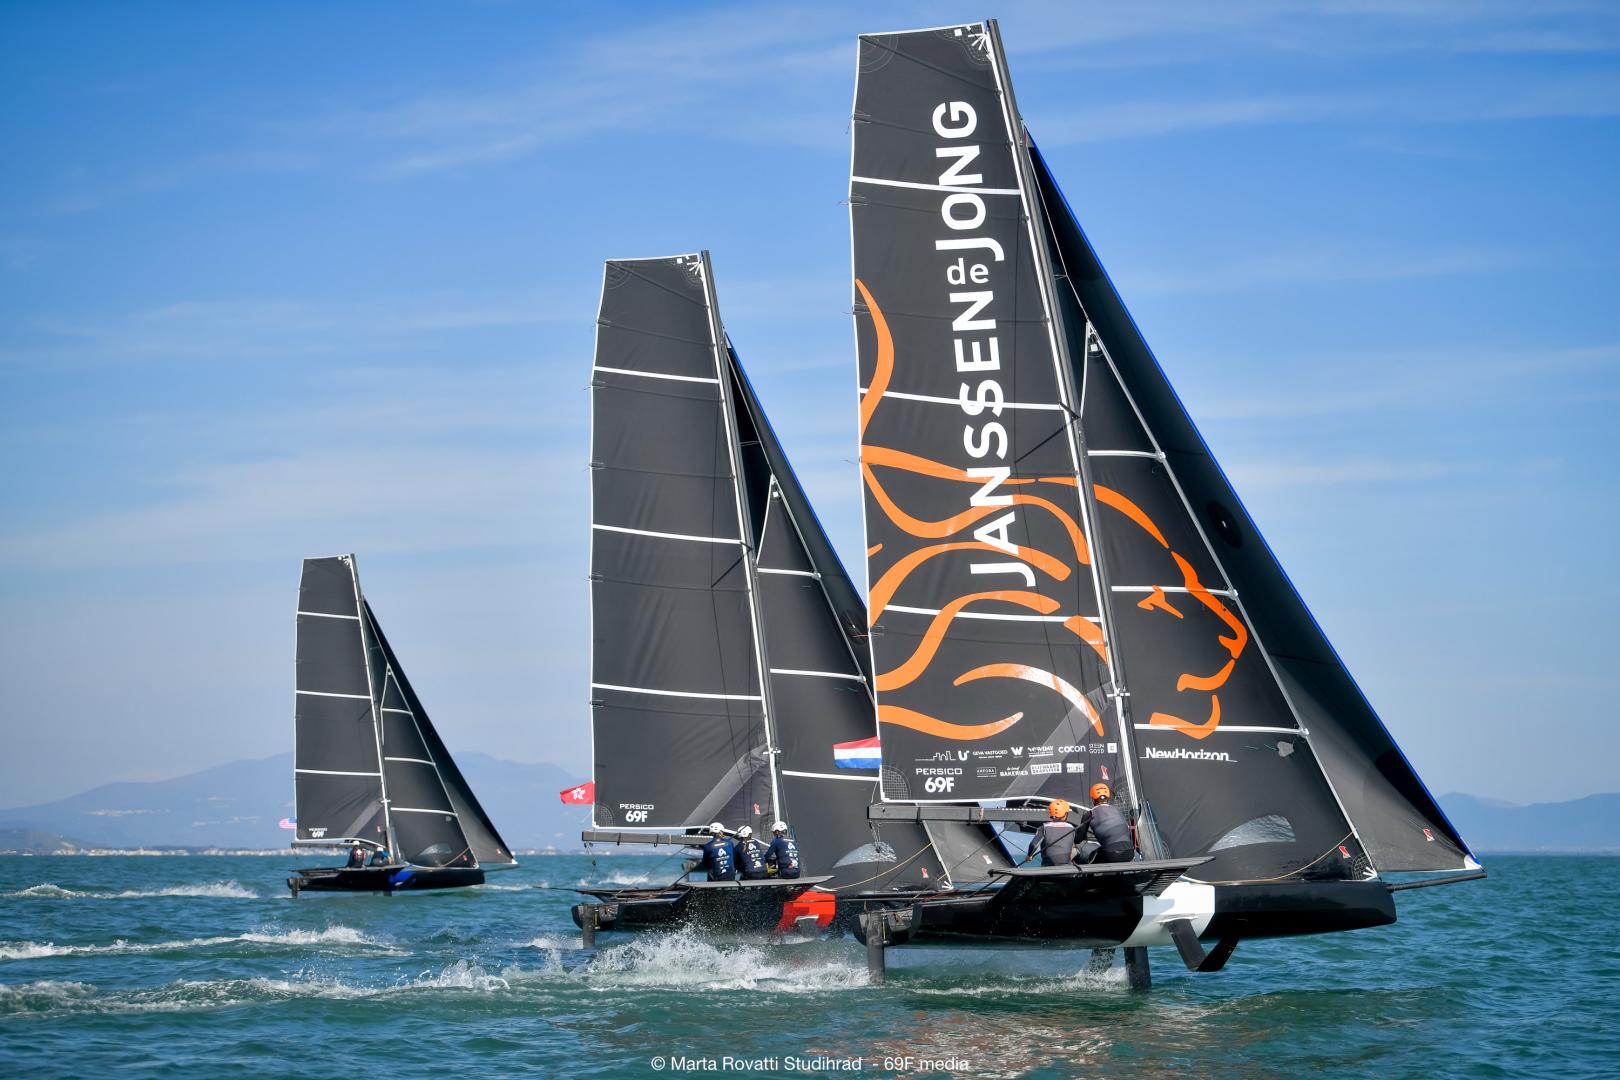 A new beginning for the 69F Youth Foiling Gold Cup